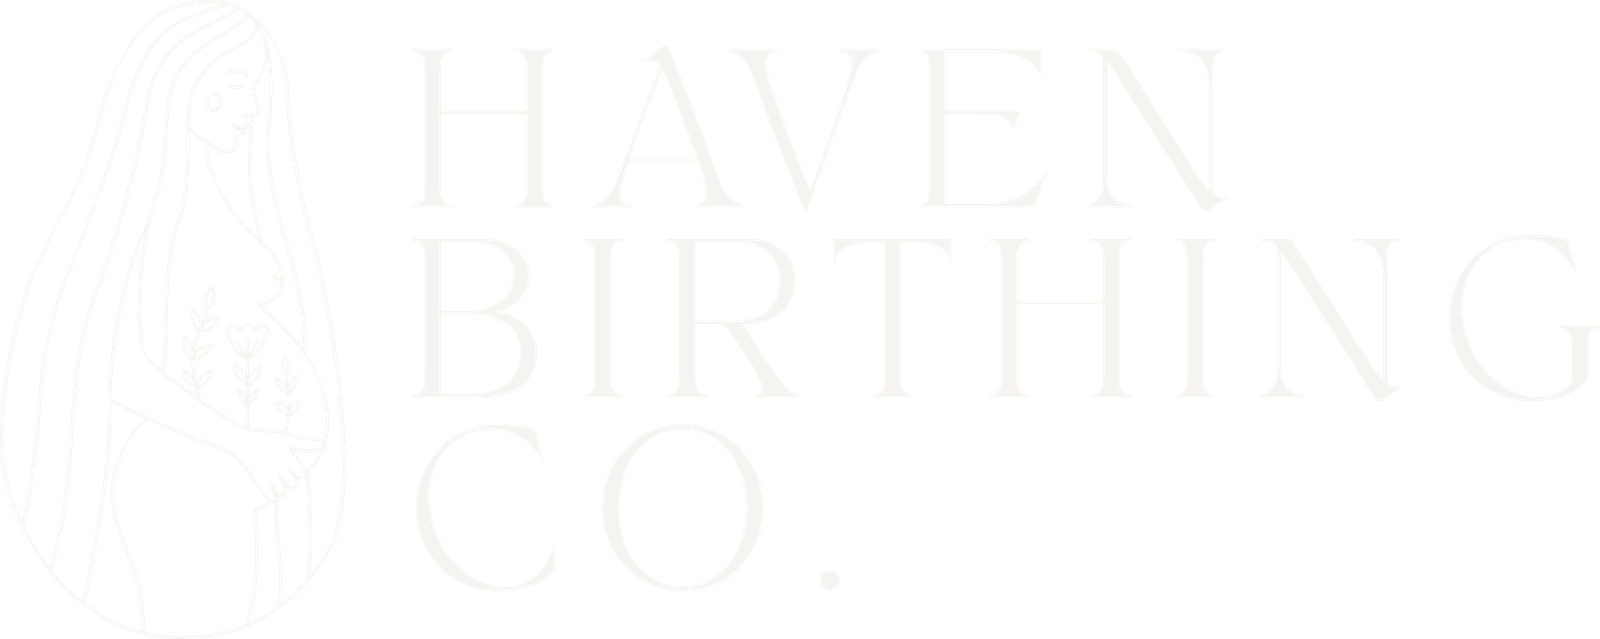 Haven Birthing Co.